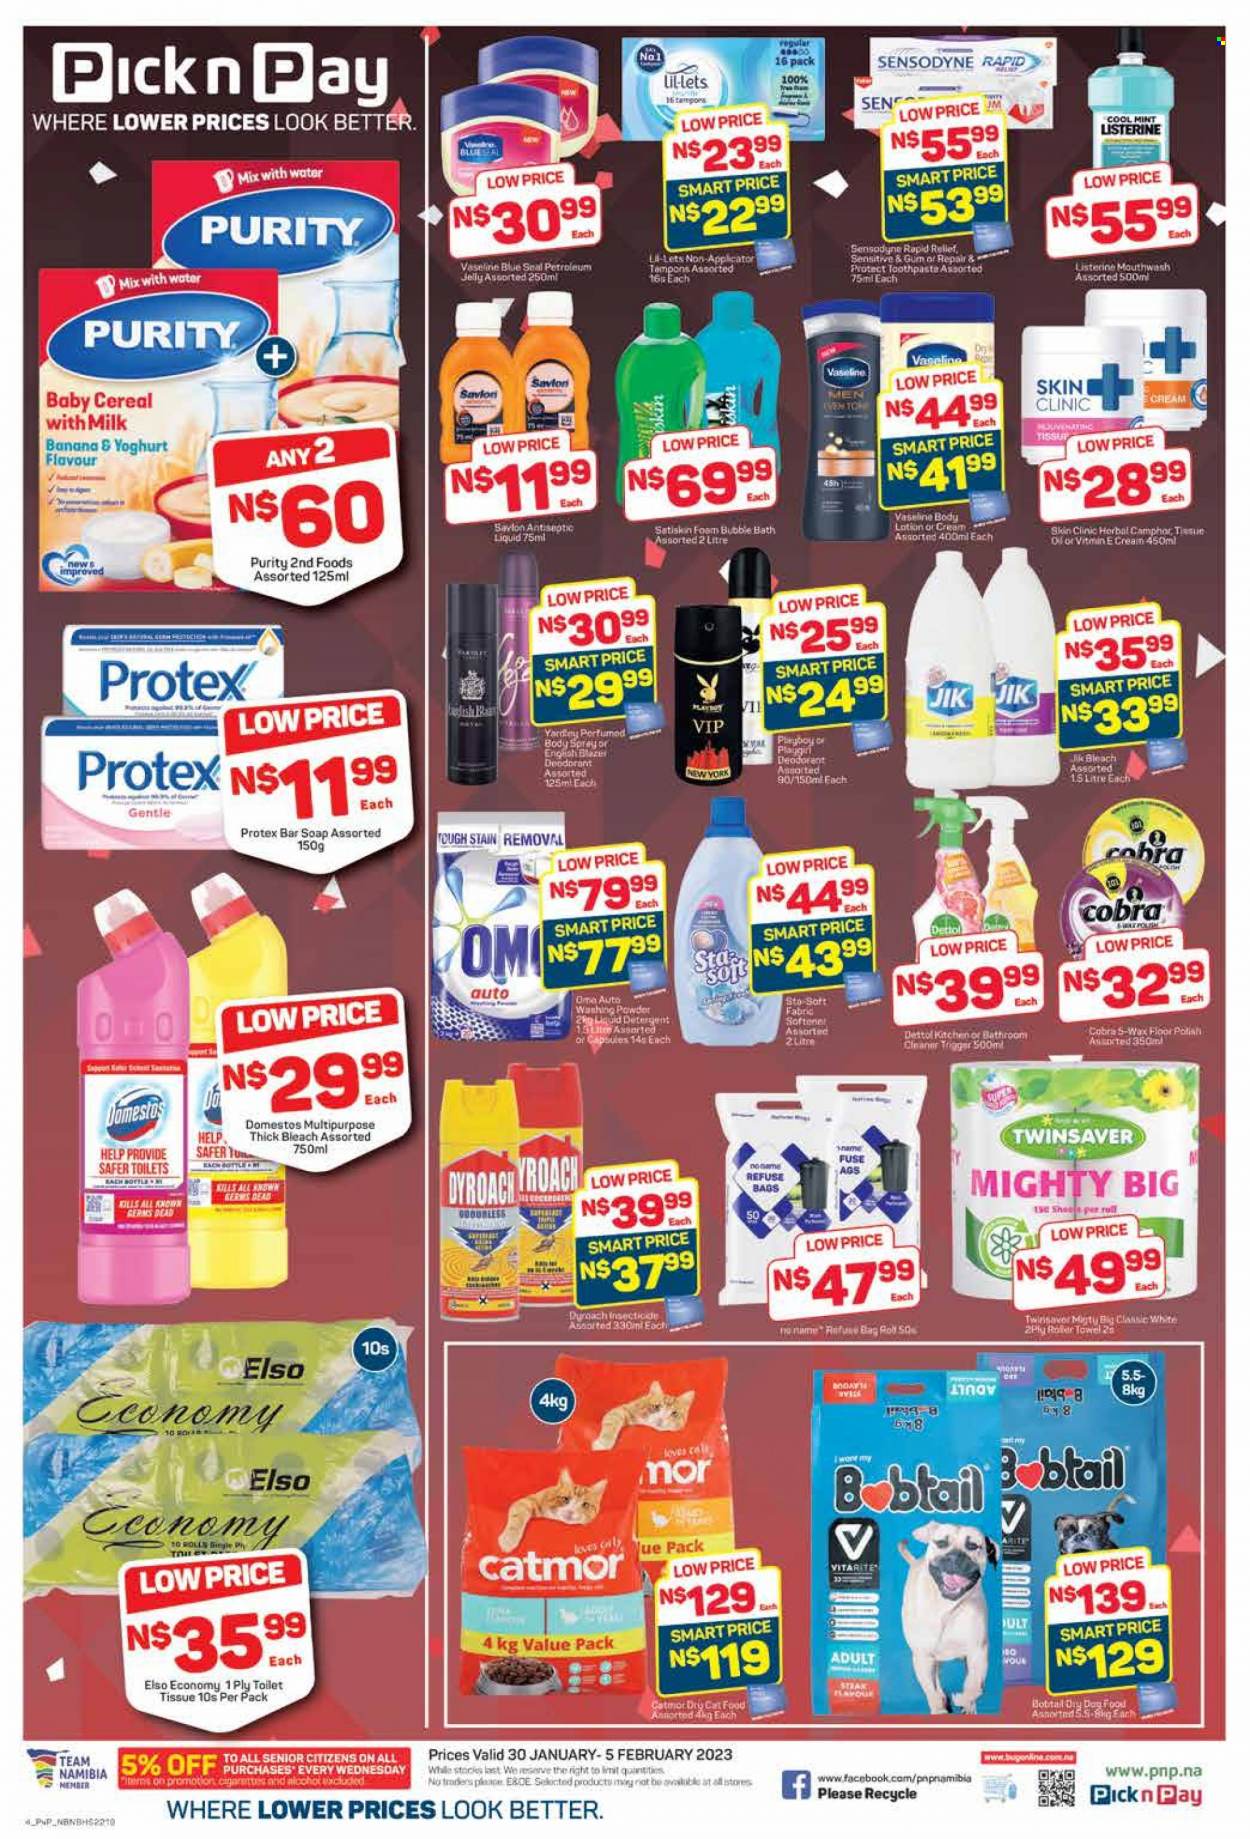 thumbnail - Pick n Pay catalogue  - 30/01/2023 - 05/02/2023 - Sales products - No Name, yoghurt, milk, cereals, alcohol, Purity, detergent, Domestos, Dettol, bleach, thick bleach, liquid detergent, laundry powder, bubble bath, Protex, Vaseline, soap bar, Satiskin, soap, Listerine, toothpaste, Sensodyne, mouthwash, Lil-lets, tampons, petroleum jelly, body lotion, body spray, insecticide, animal food, cat food, dry cat food. Page 4.